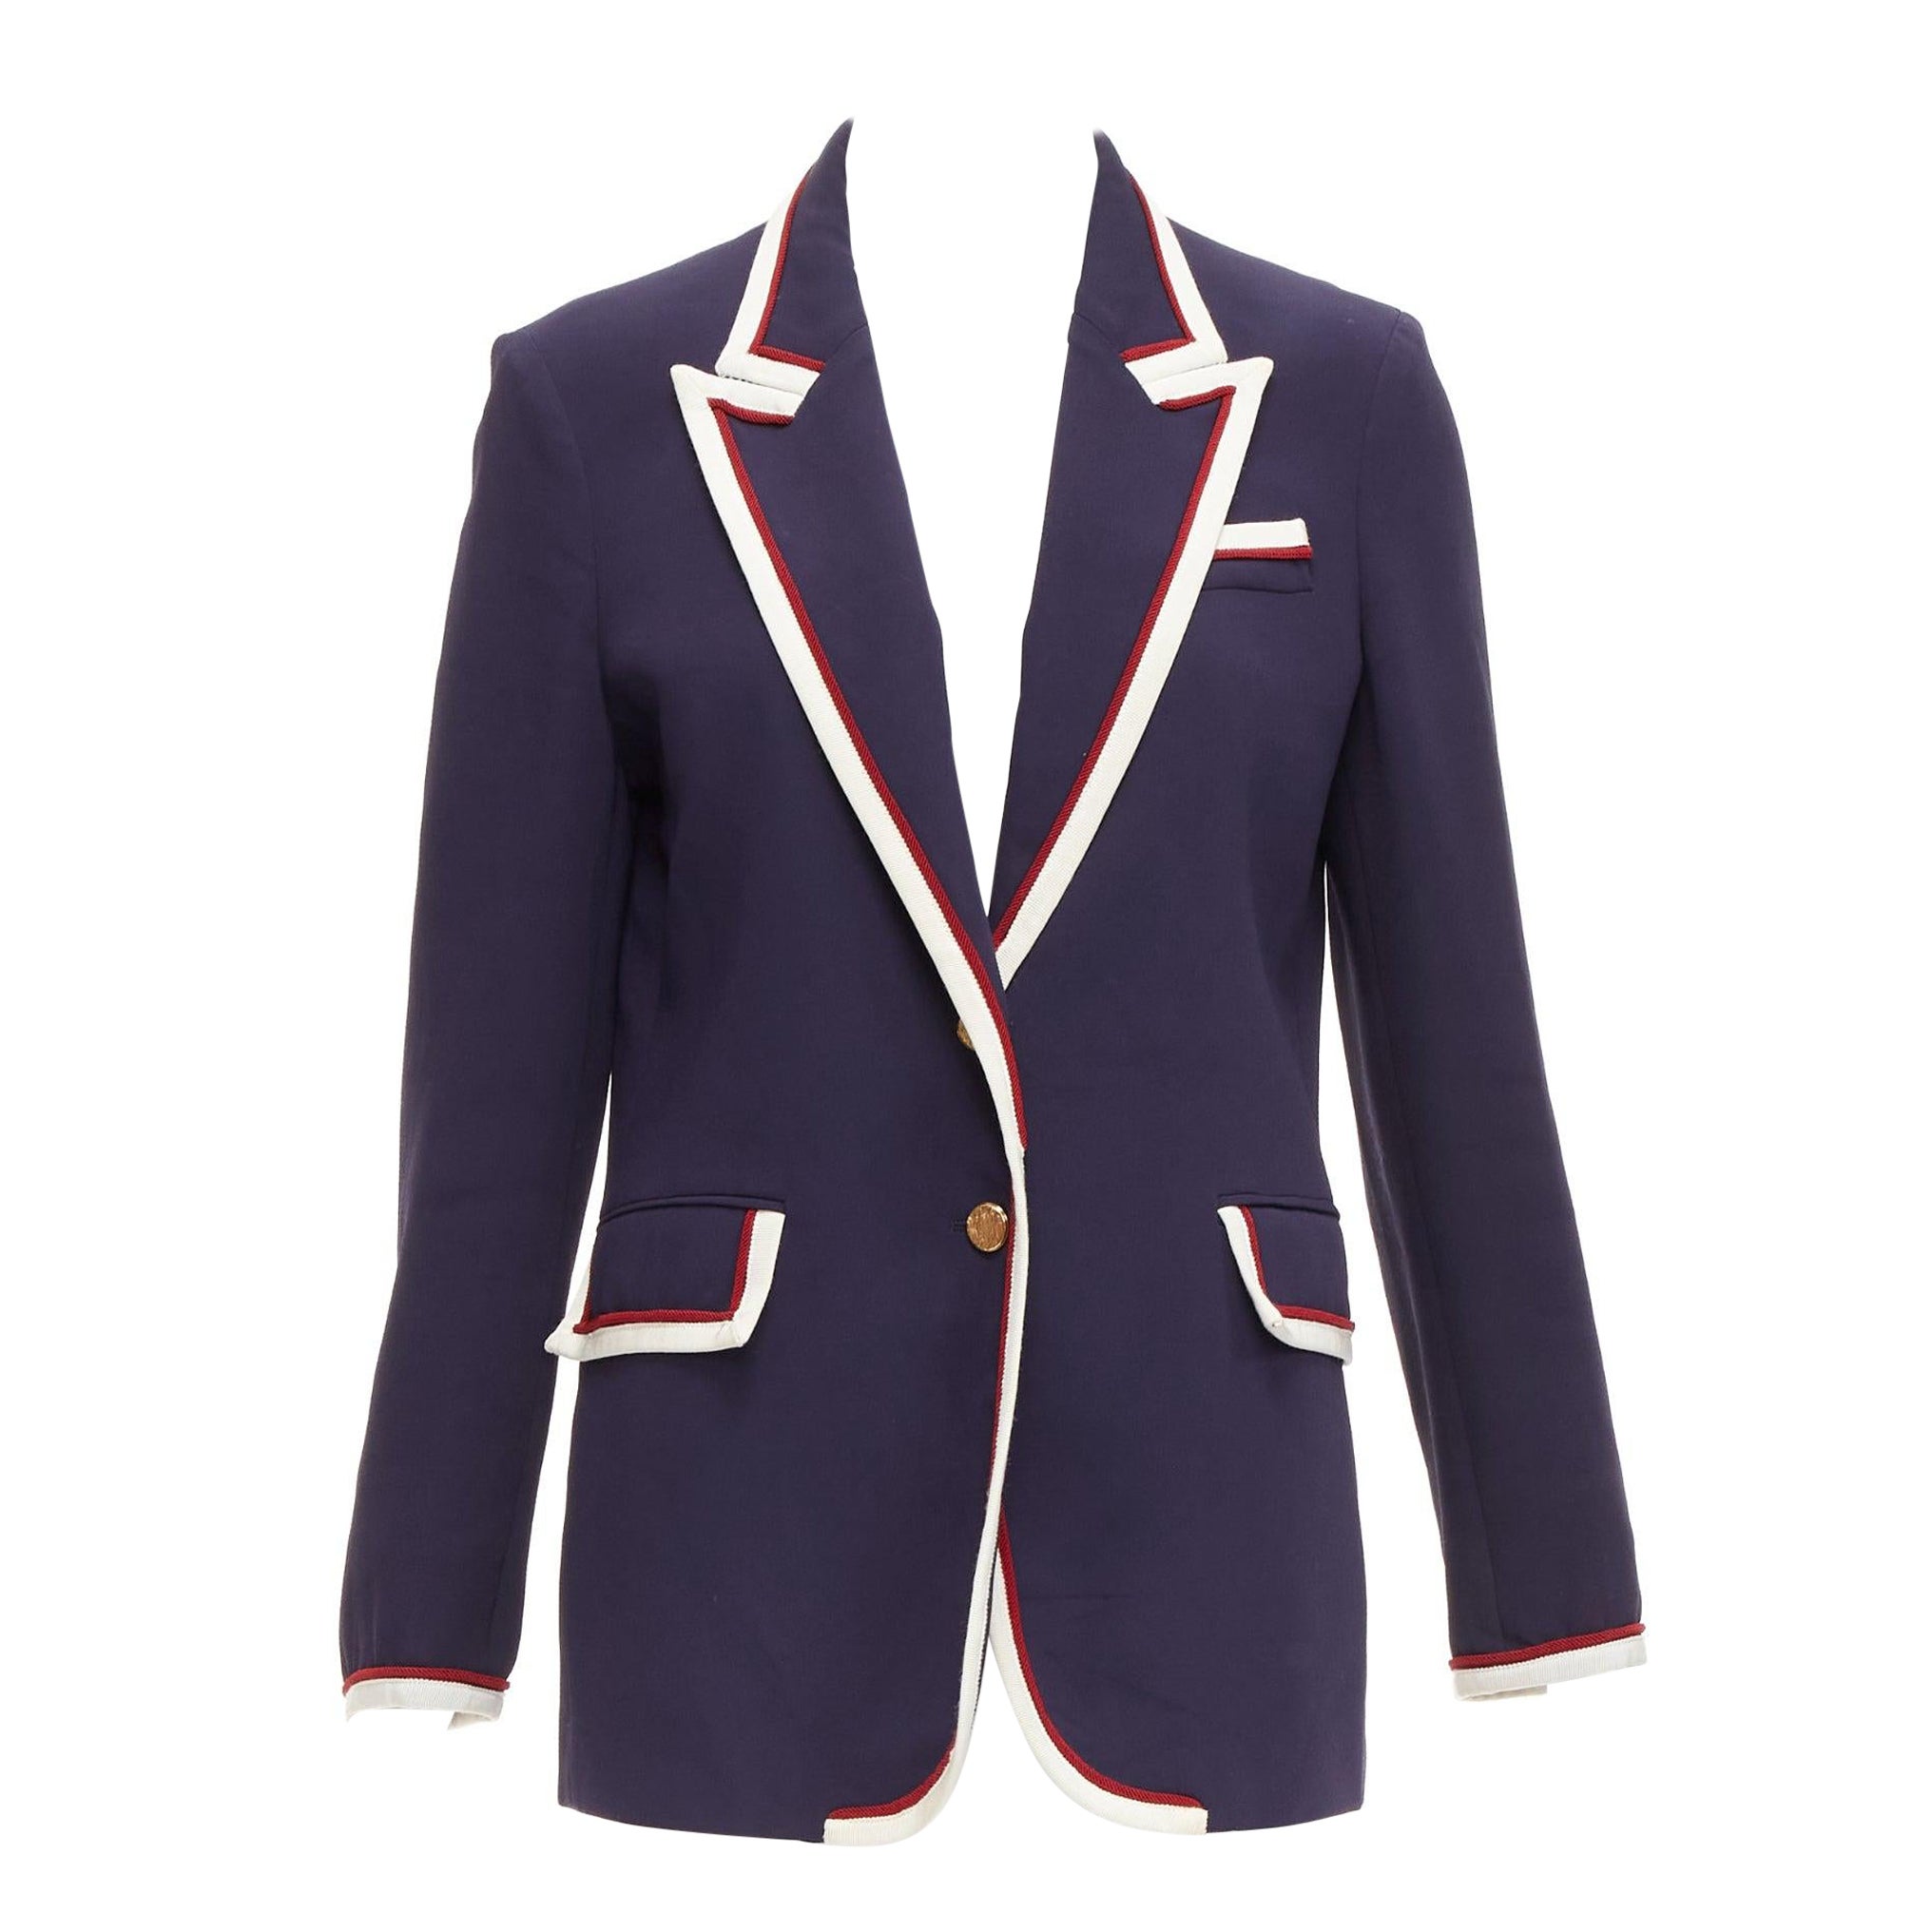 GUCCI Alessandro Michele 2019 navy trimmed GG printed lining blazer IT44 L For Sale